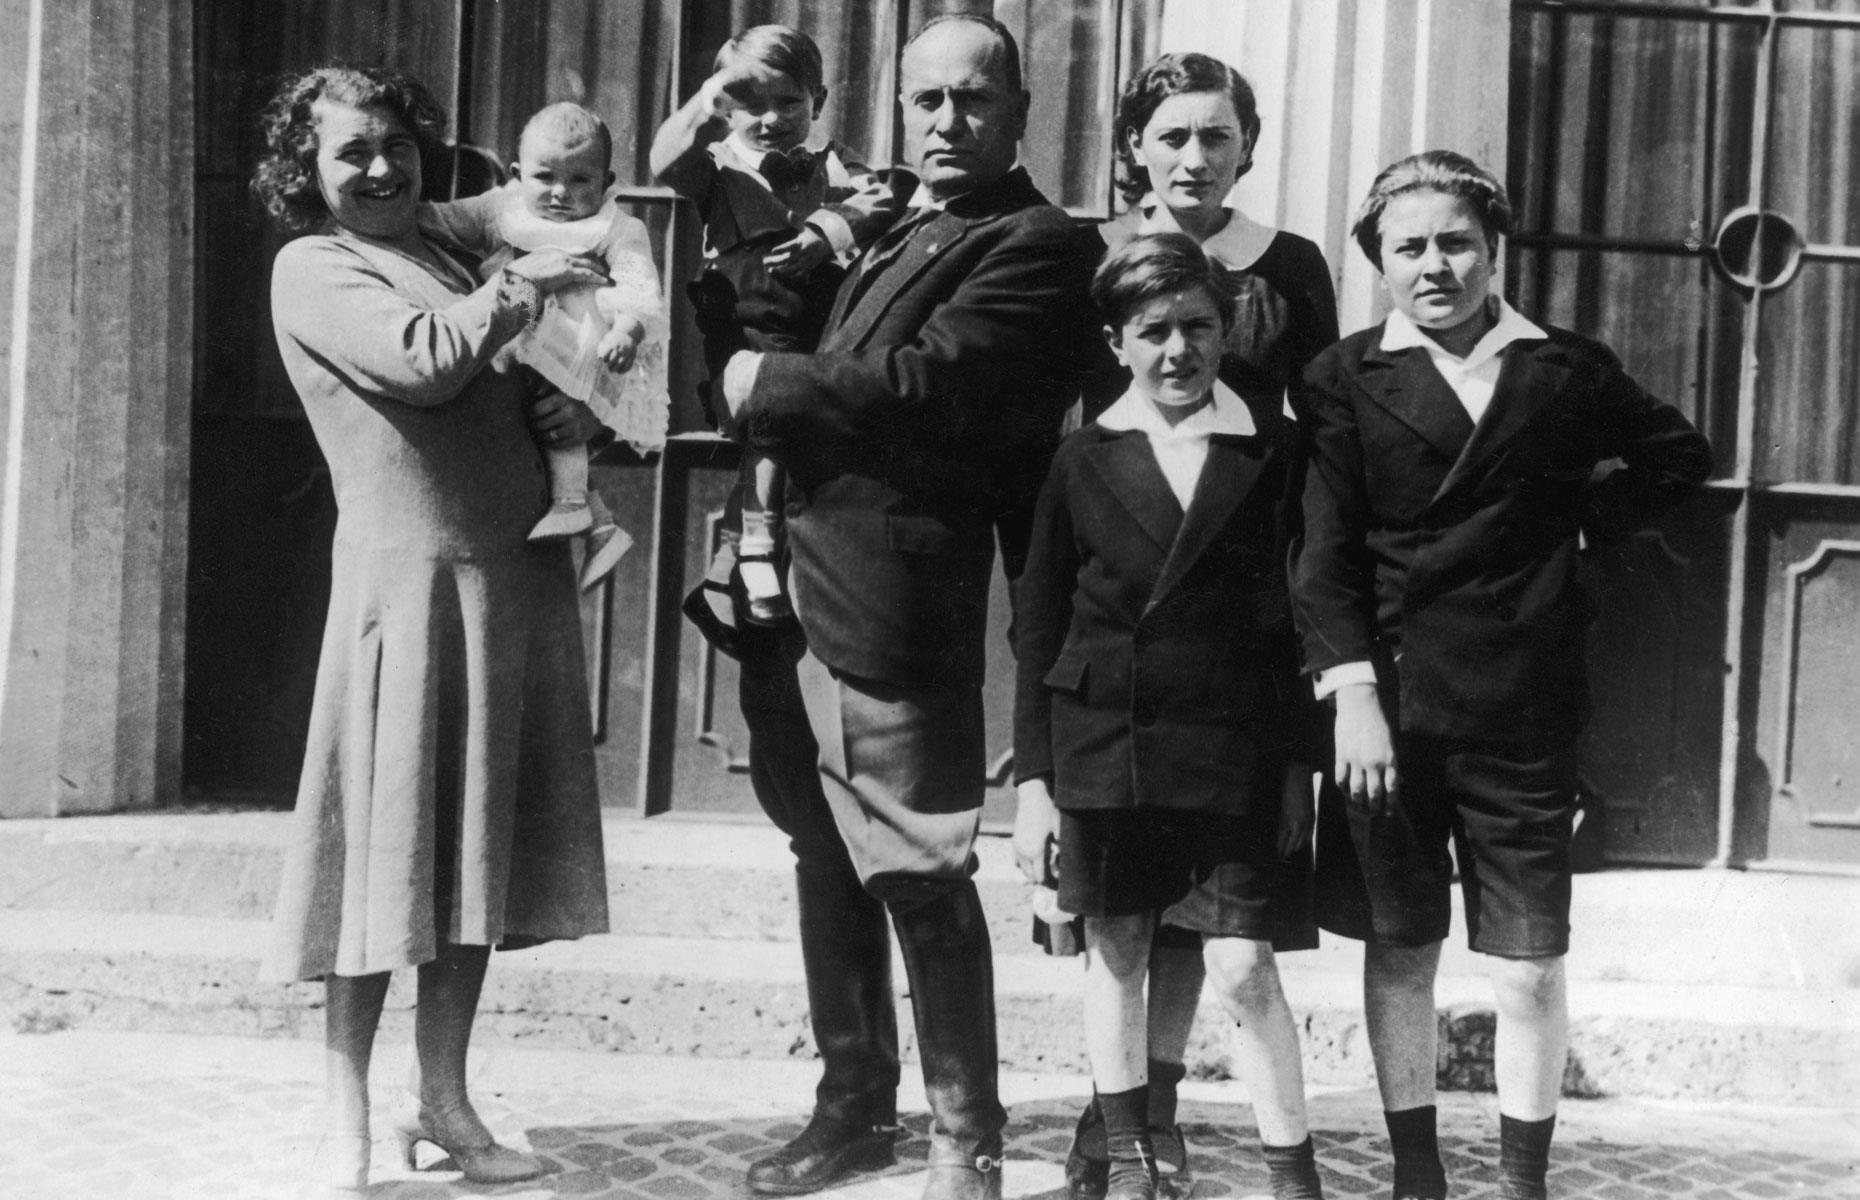 <p>Rome's splendid Villa Torlonia was the official residence of Italian dictator Benito Mussolini, who lived in the property with his wife and five children from 1925, paying a peppercorn rent of just one lira a year. The family are pictured here outside the swish neo-classical palazzo in the early 1930s.</p>